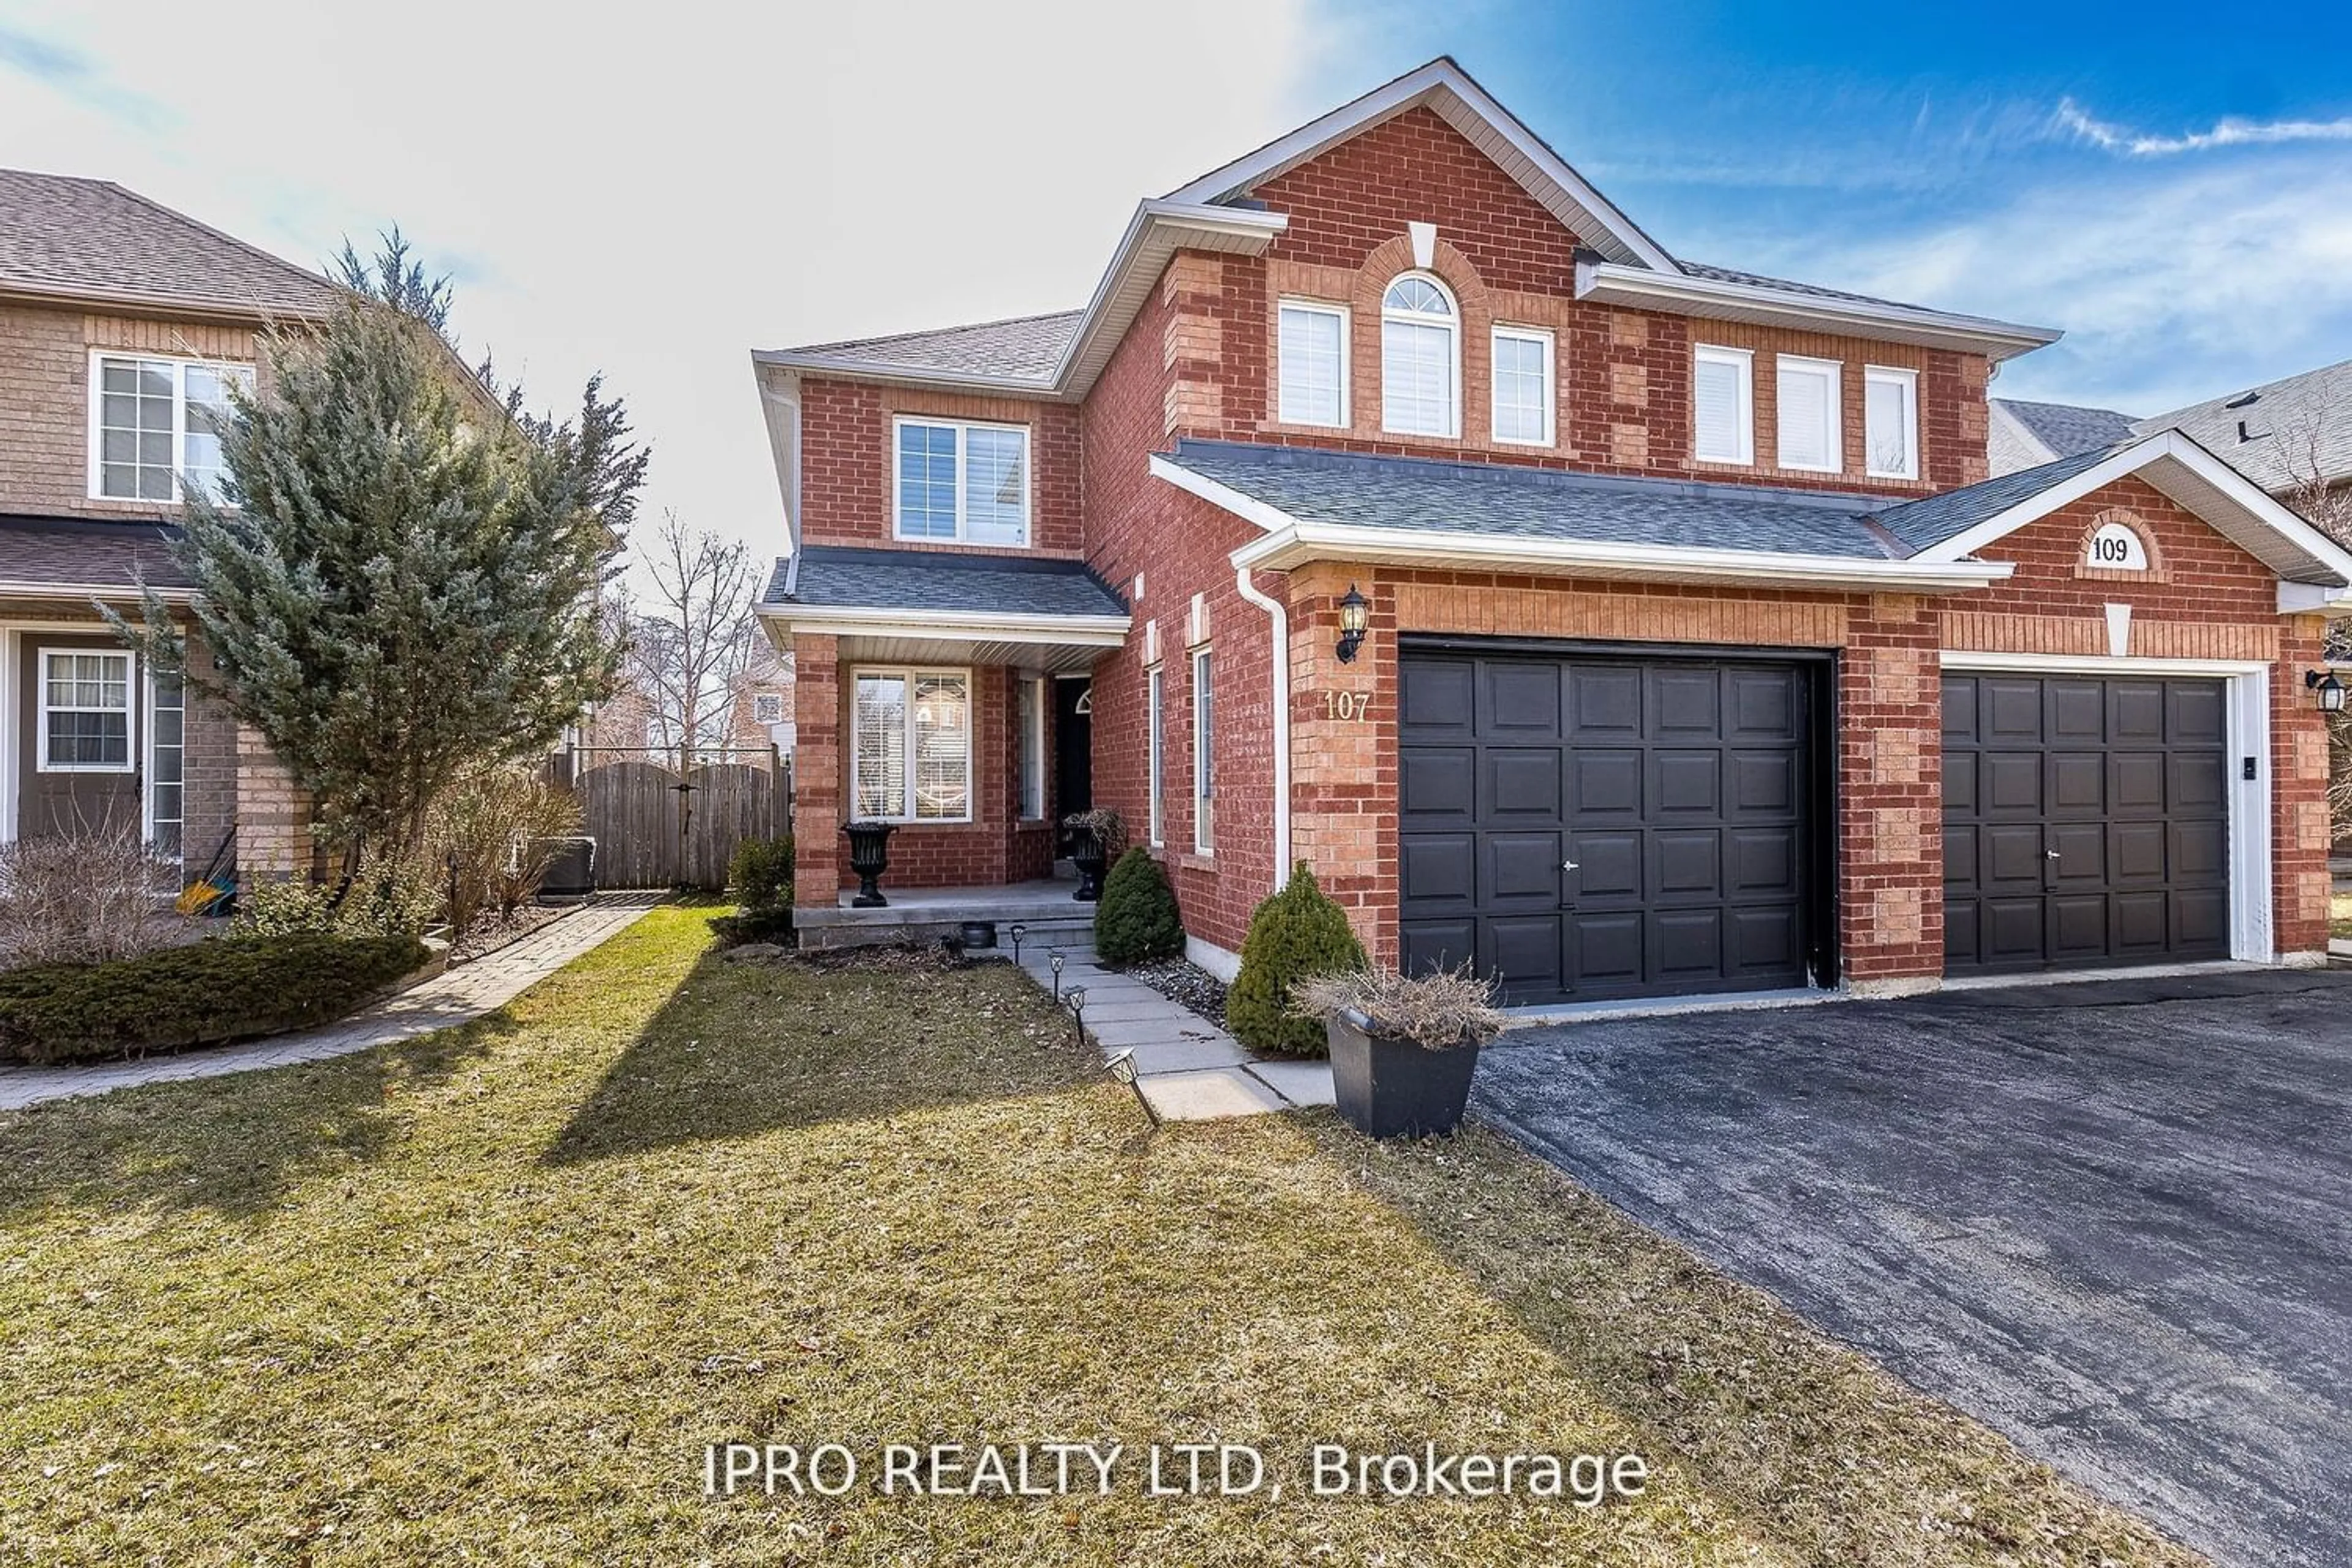 Home with brick exterior material for 107 Mowat Cres, Halton Hills Ontario L7G 6C7